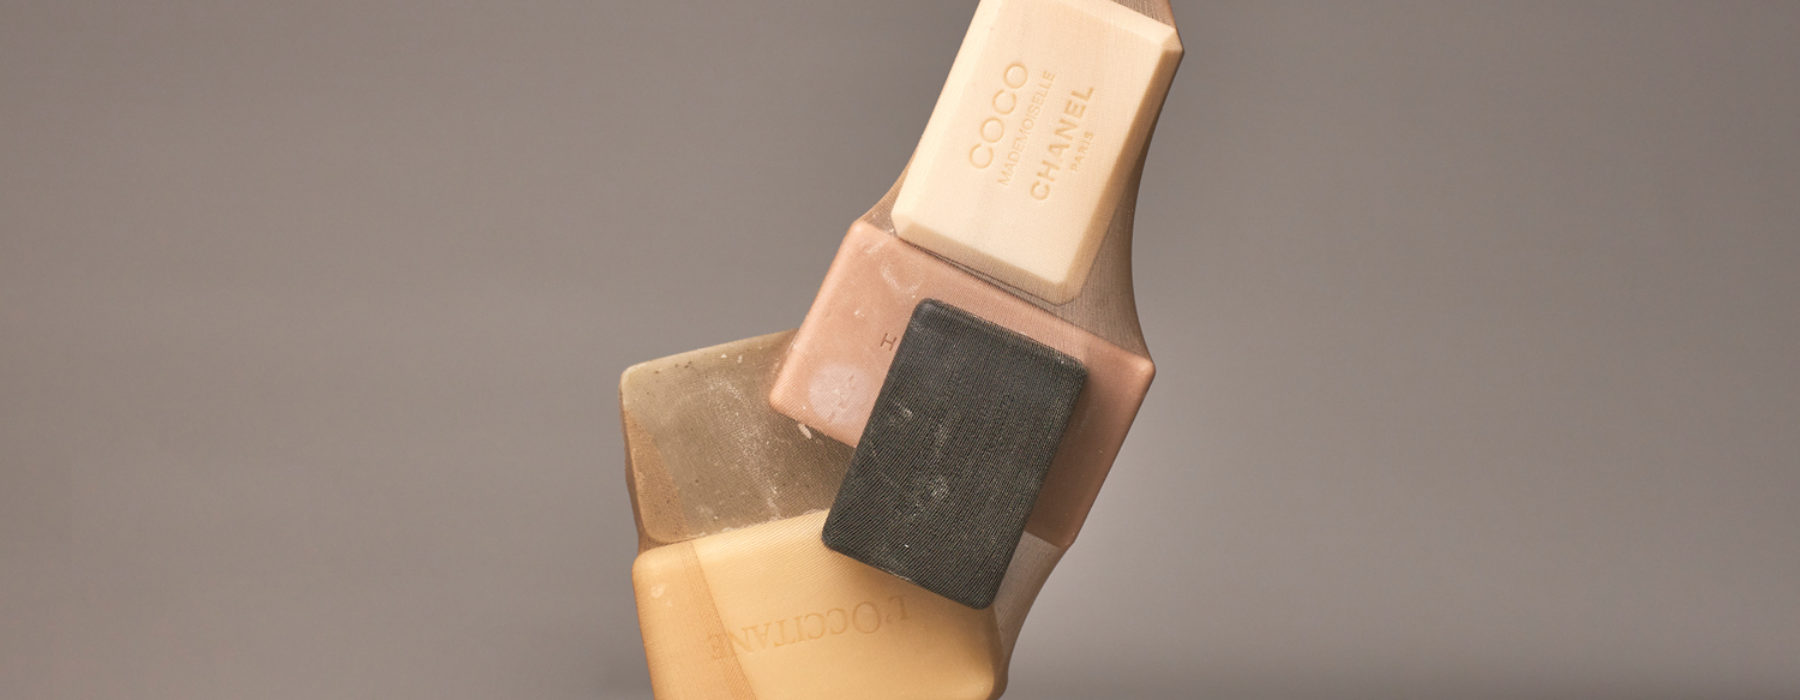 En Route Beauty - 5 Of The Best Bar Soaps, You'll Want To Shower